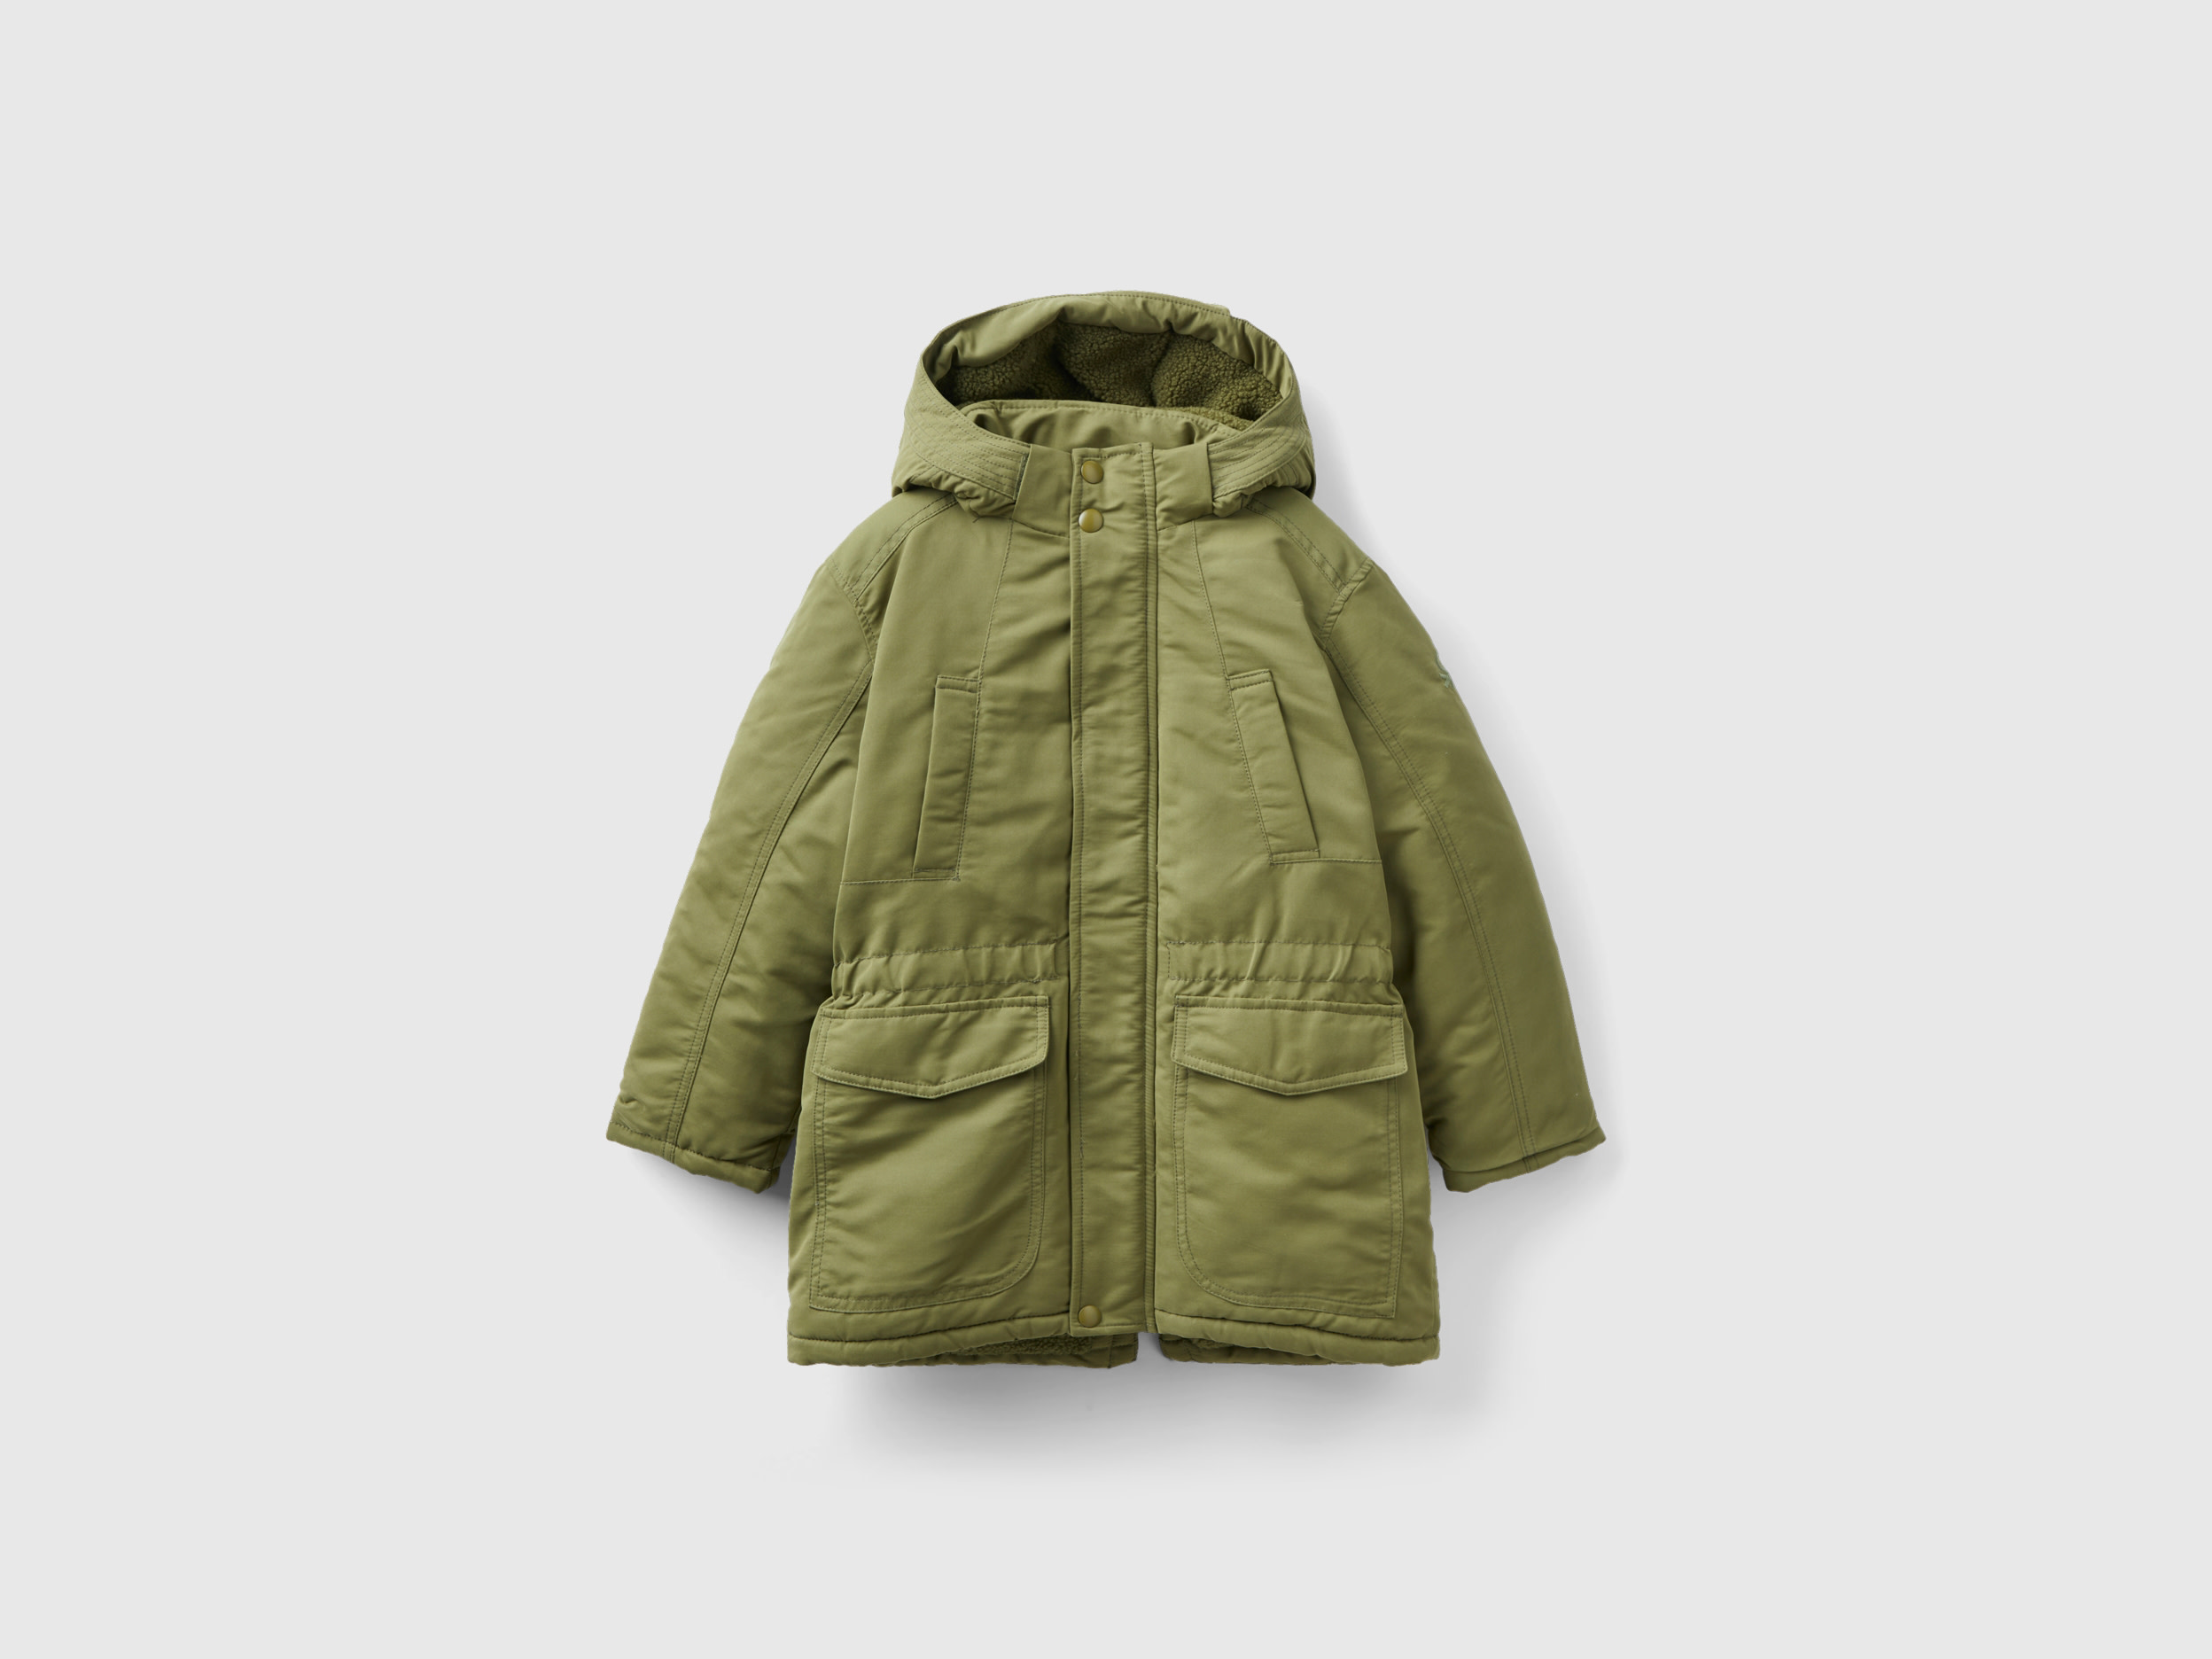 Benetton, Padded Parka With Pockets, size XL, Military Green, Kids